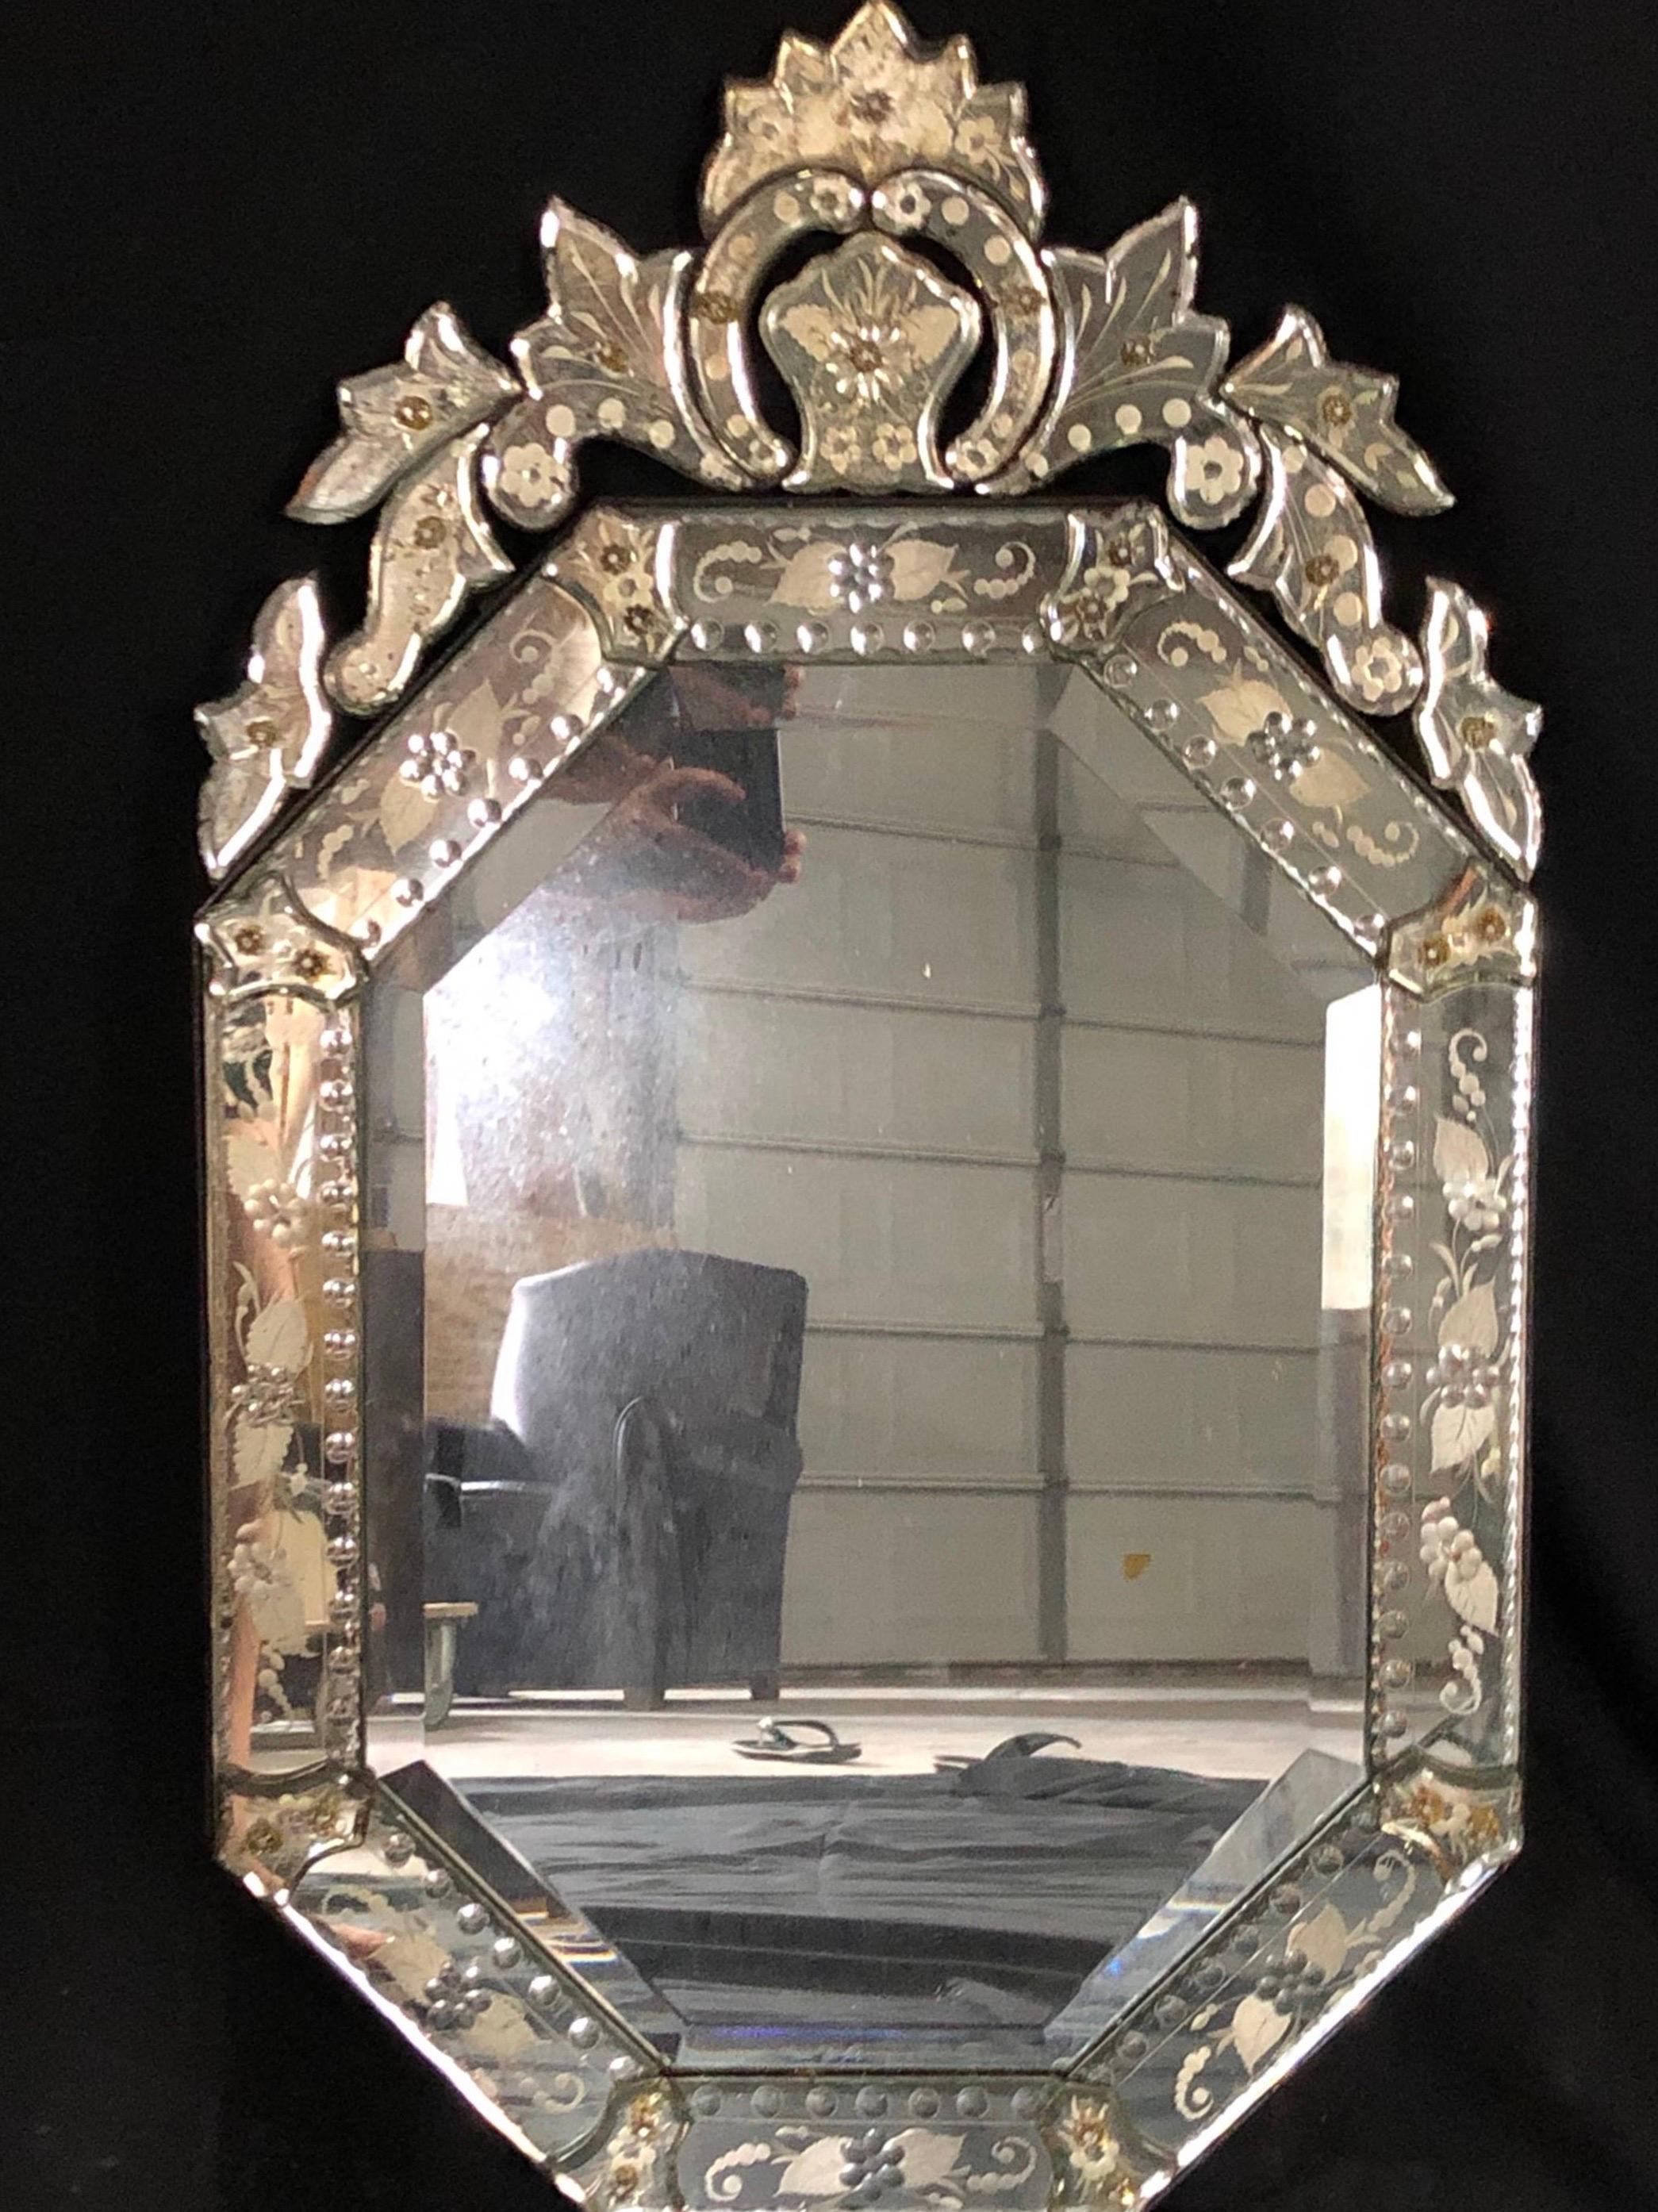 An intricate circa 1940s Venetian mirror with etched foliage and floral motif and with detailed crown. All intact and original glass! #5216.